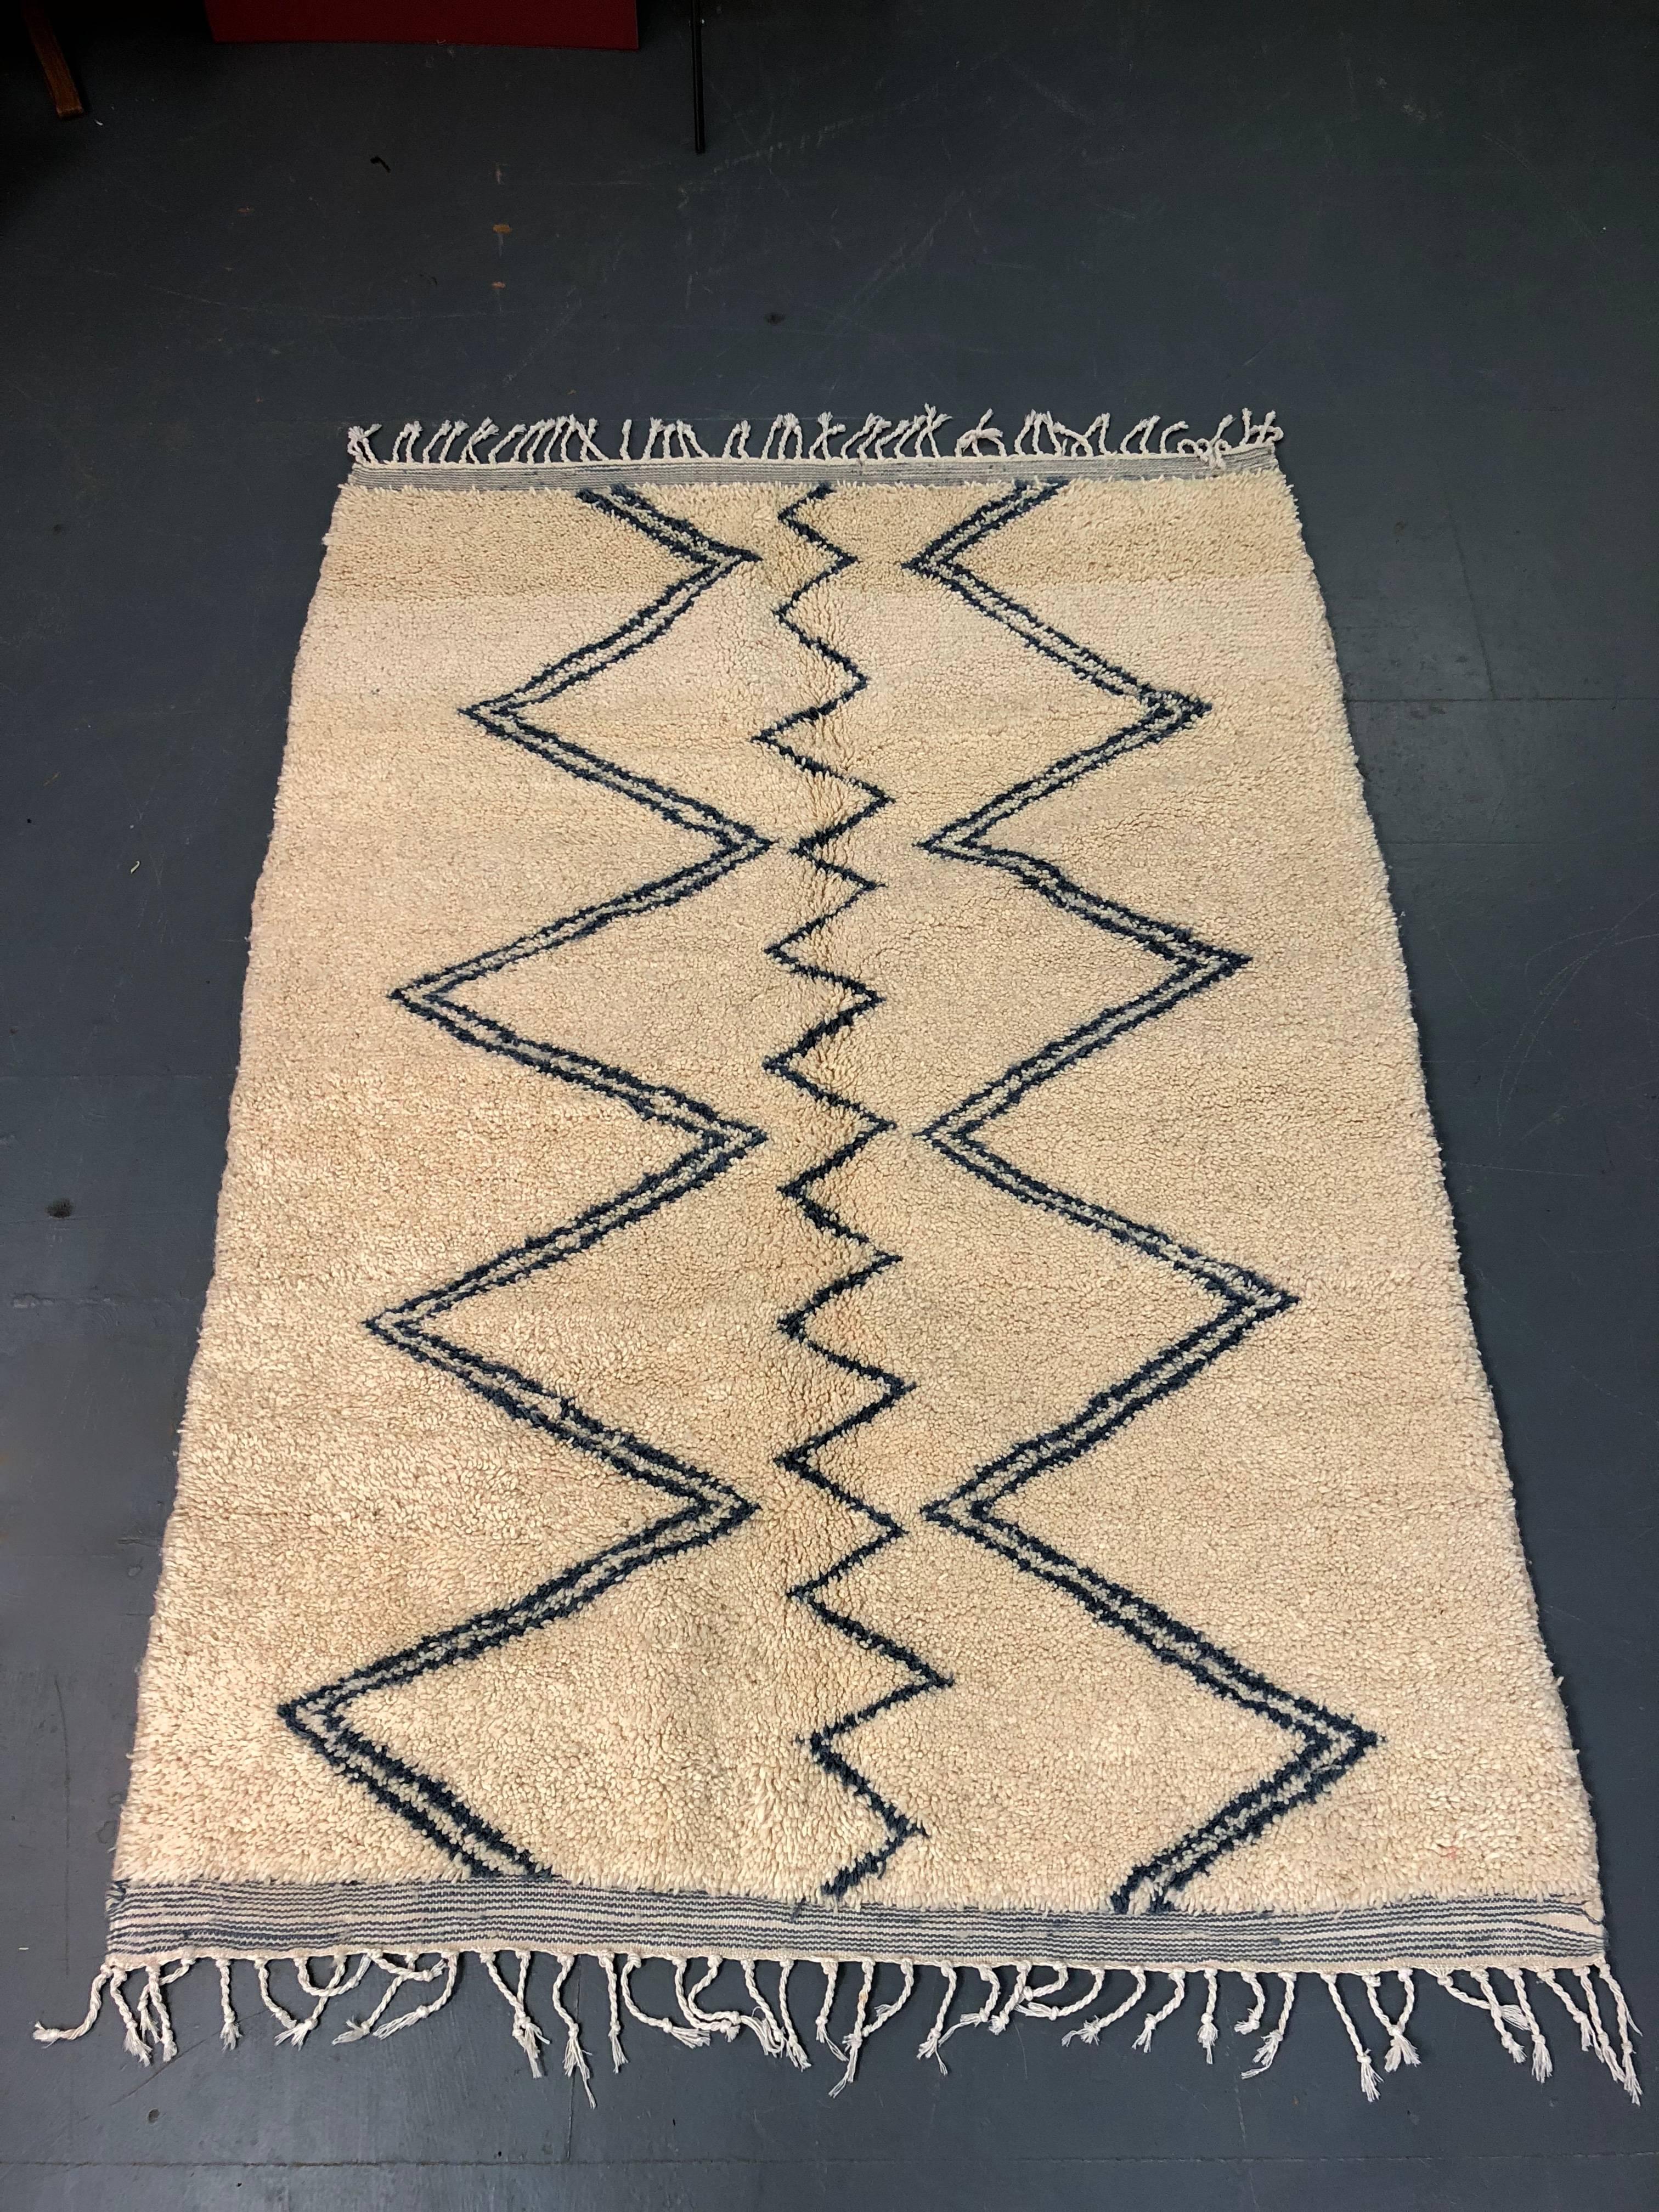 Beautiful Azilal rug from Morocco. Handcrafted from wool and cotton, no two of these are the same. Sourced from the villages of the Atlas Mountains, these rugs are vibrant and creative, an expression of modernism in folk art. They set off vintage